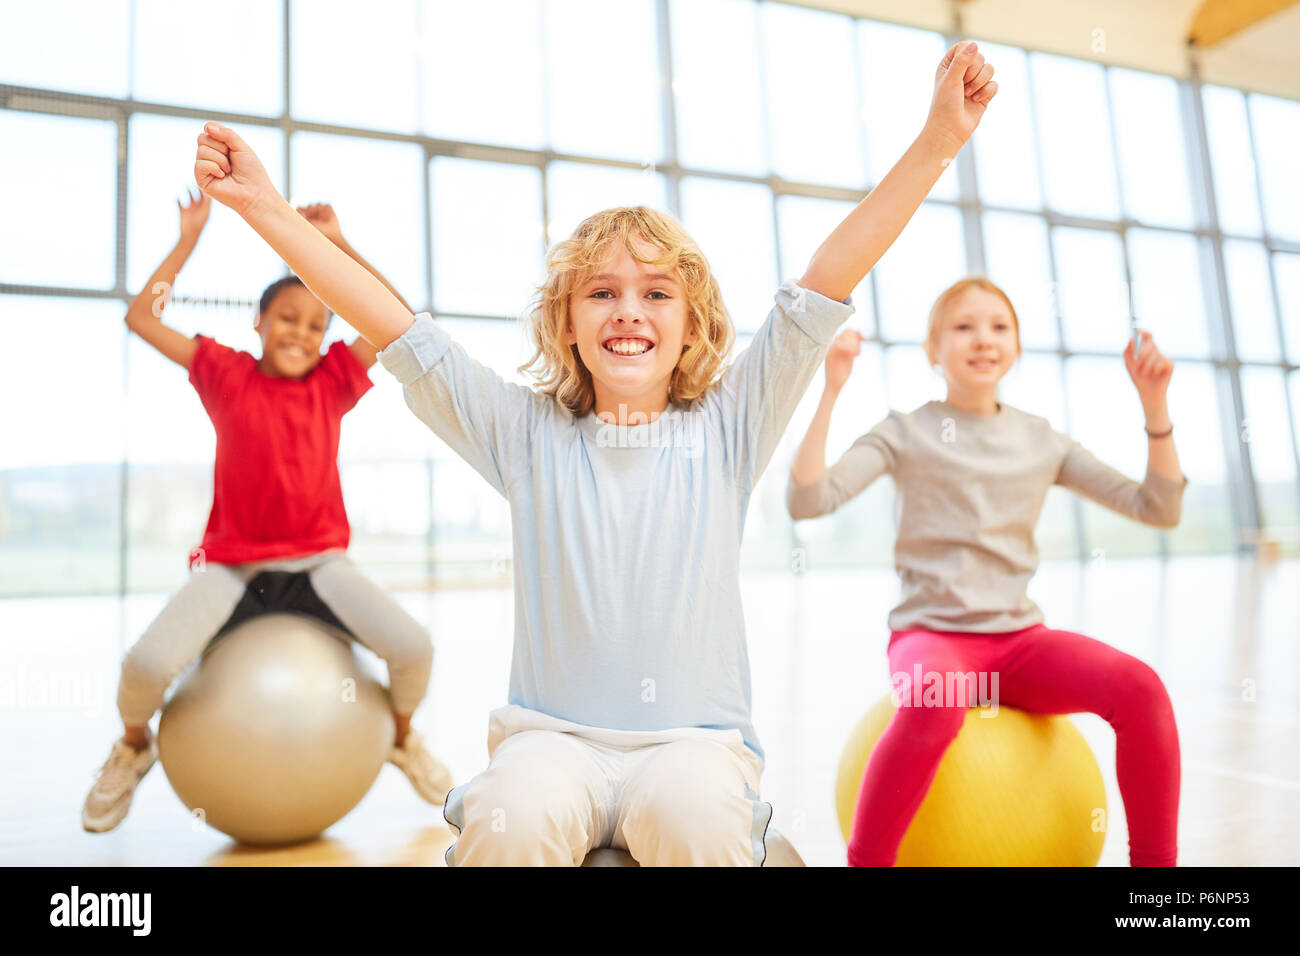 Cheering group of kids with bouncy ball in elementary school physical education Stock Photo